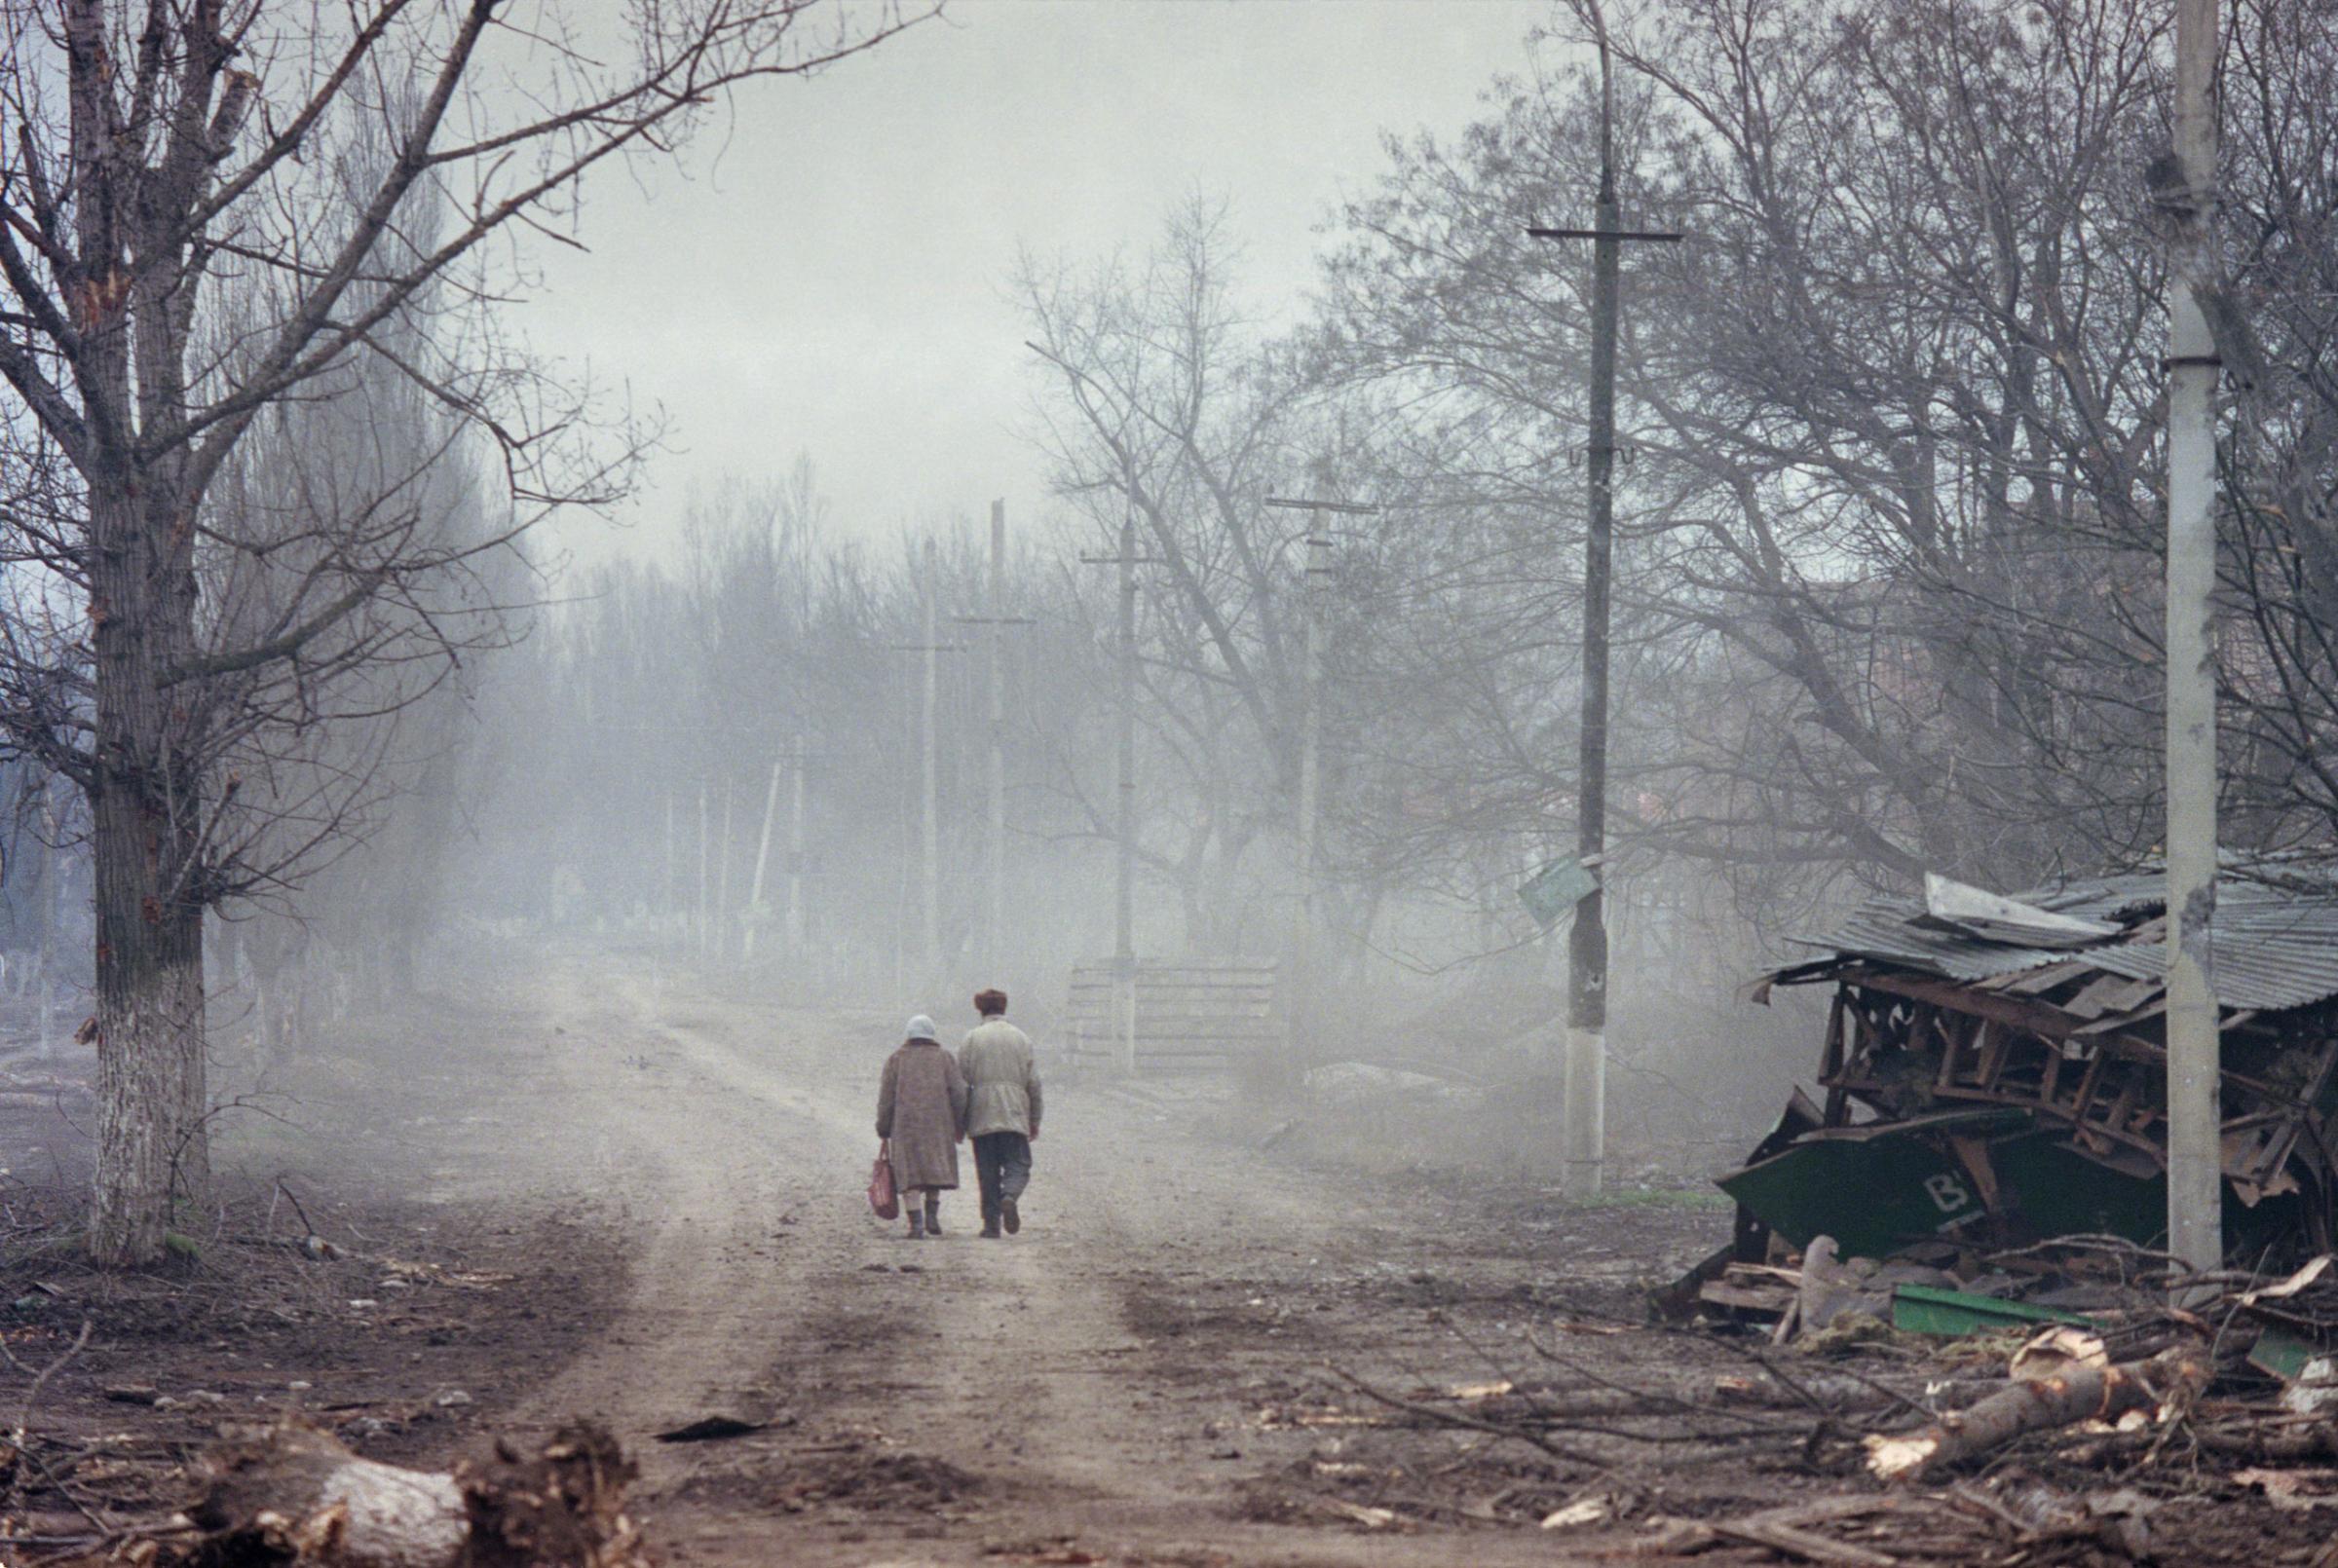 A couple walks through the ruins of Grozny, the capital of Chechnya, which was flattened by Russian air strikes in the second Chechen war, March 2002. Yuri kozyrev—NOOR